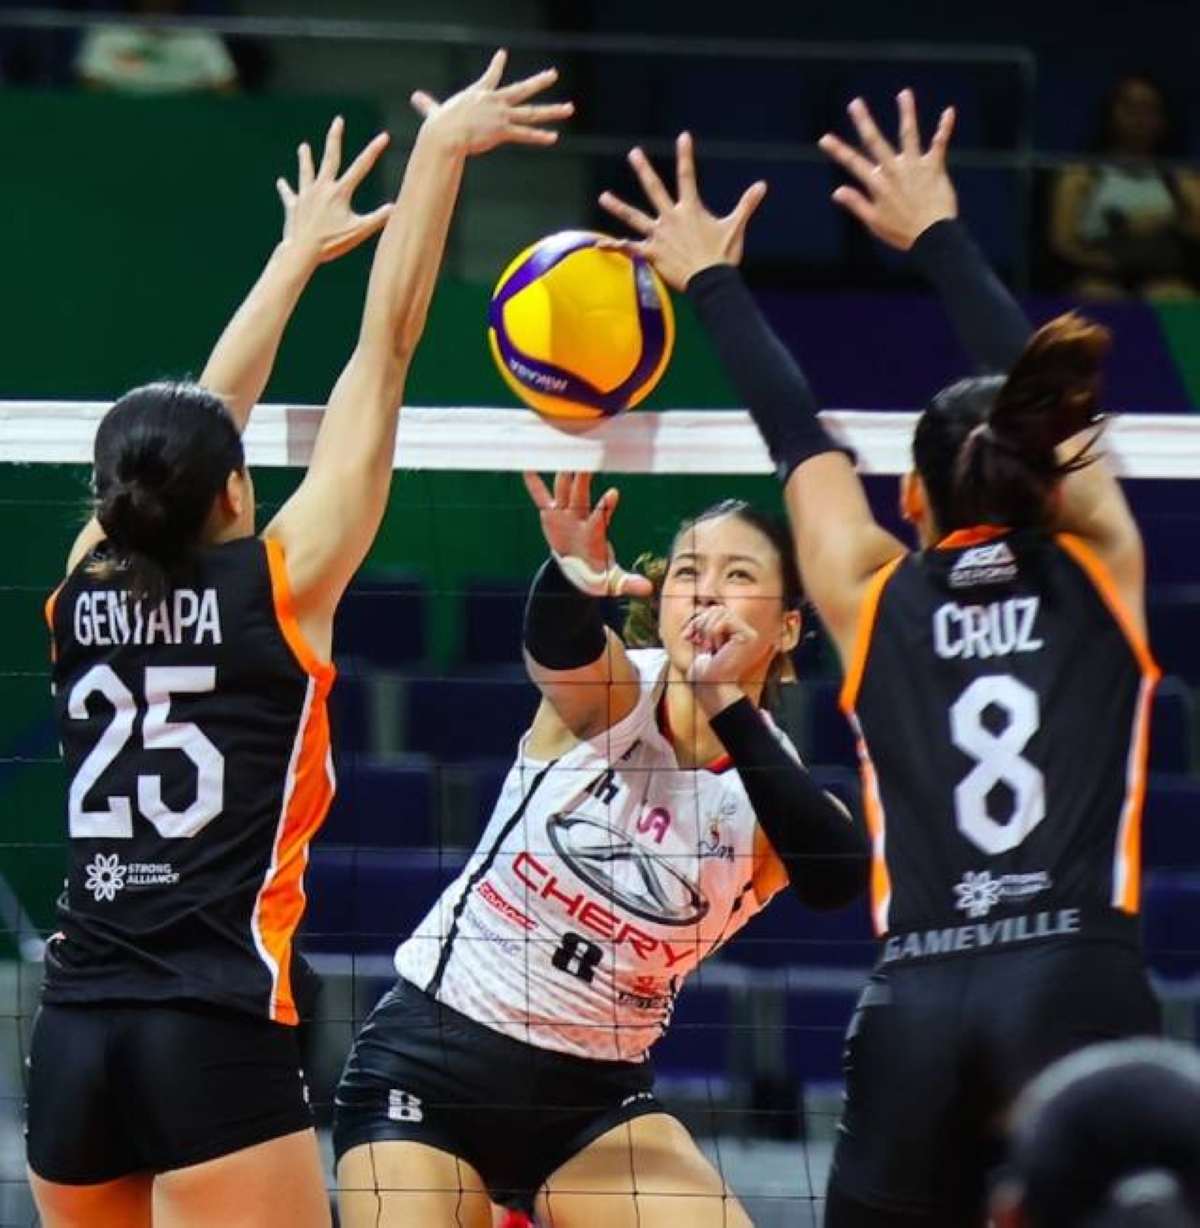 aby, ara presence boosts eya's confidence